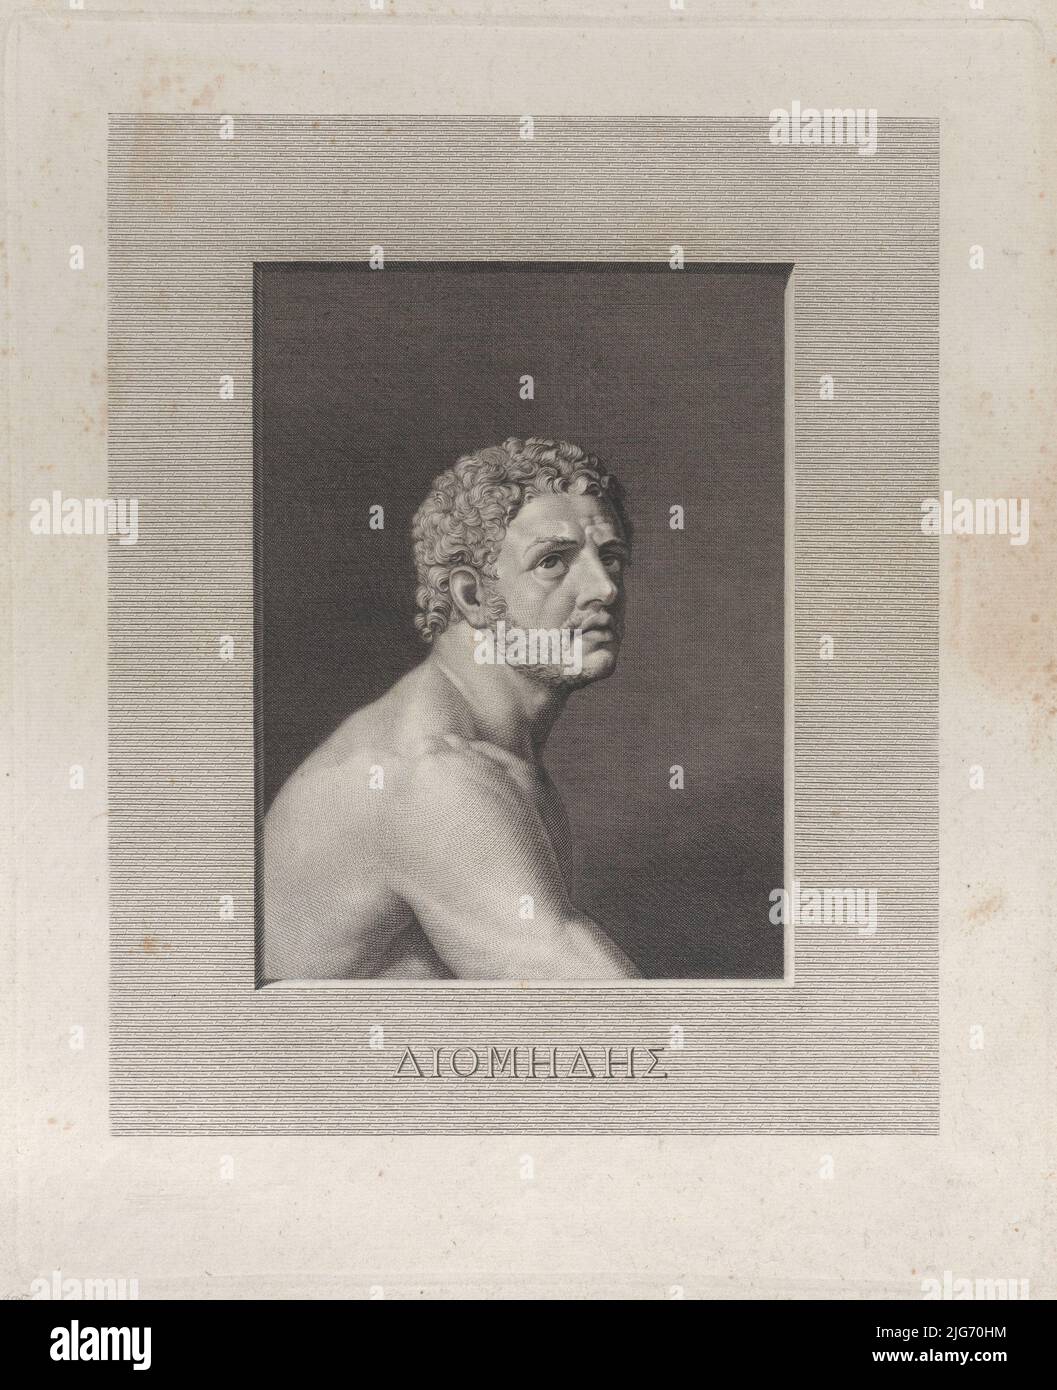 Diomedes, bust and shoulders, 1790-1800. Stock Photo